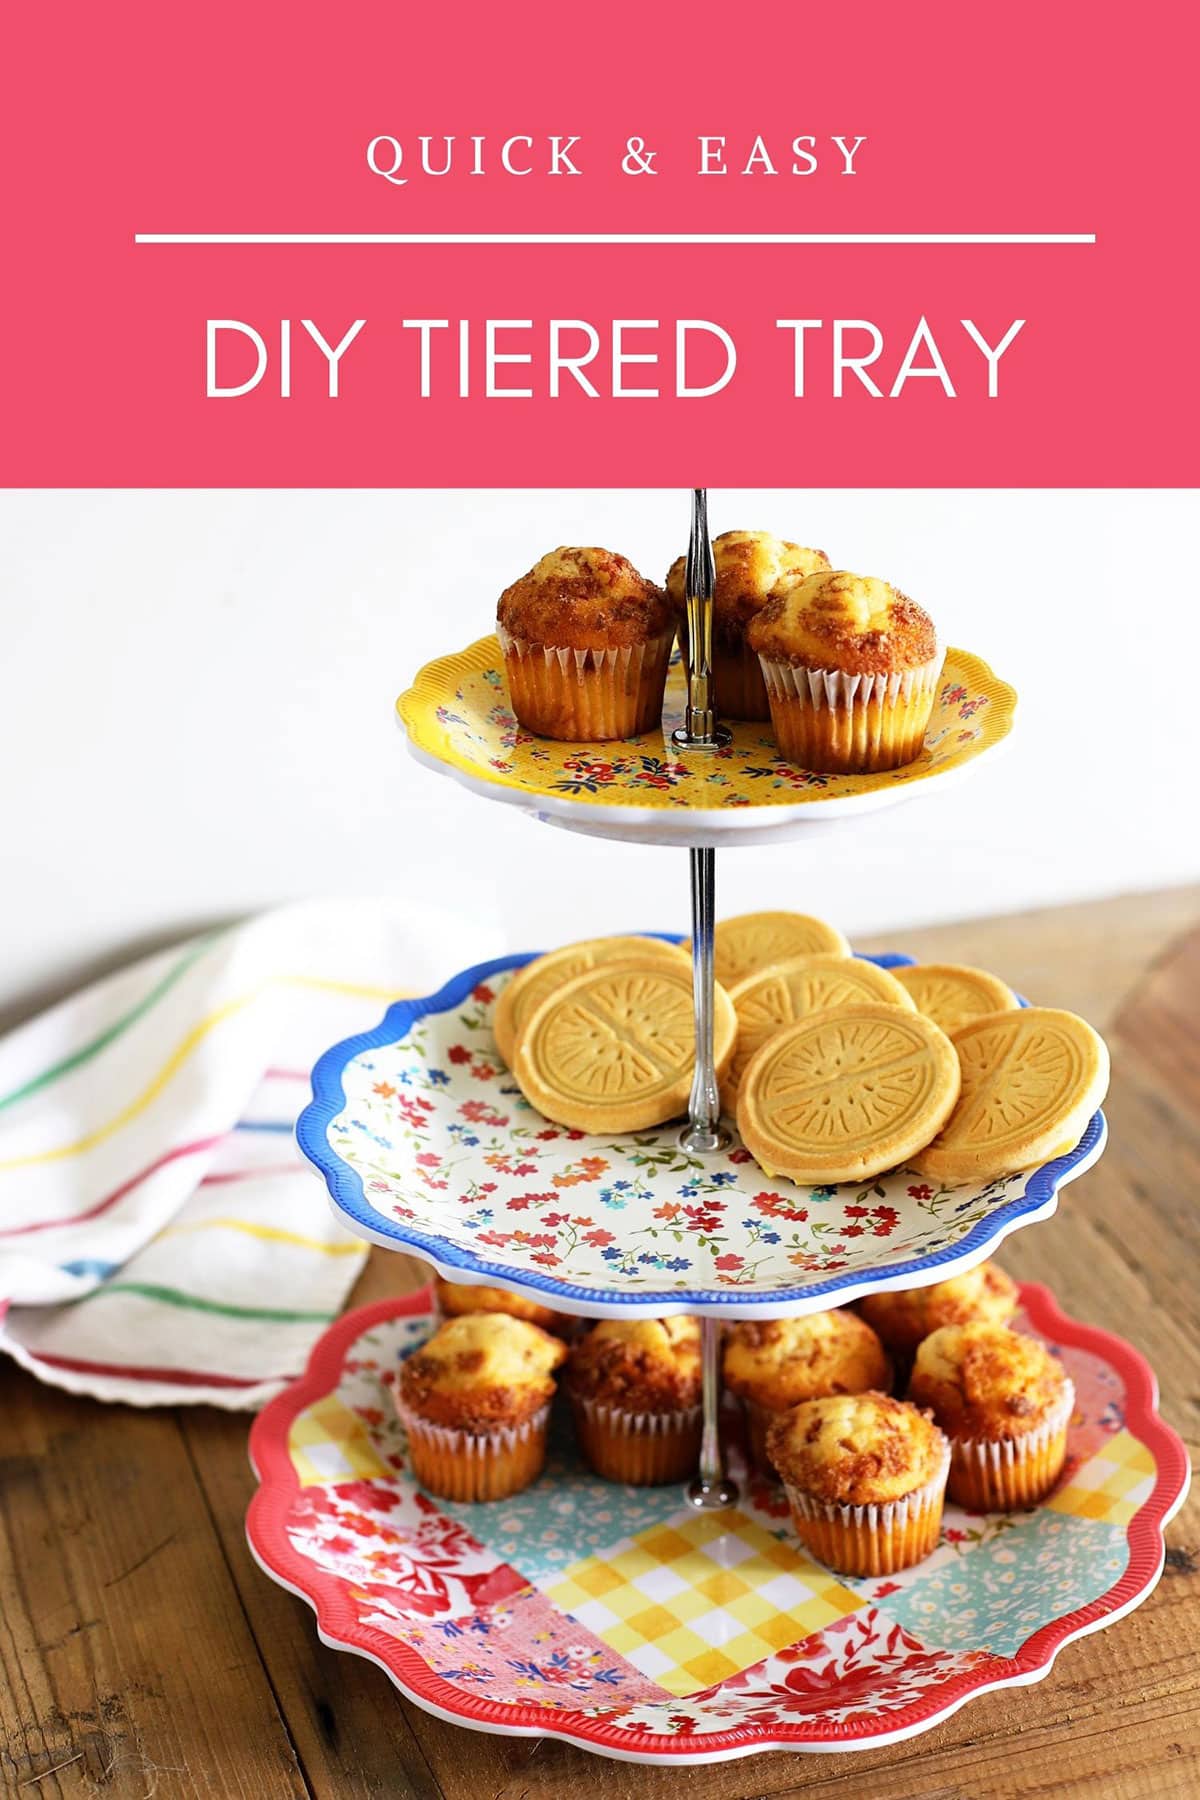 Learn how to make your own 3 tiered tray from inexpensive plates. Great project for upcycling china and ceramic plates from the thrift store.